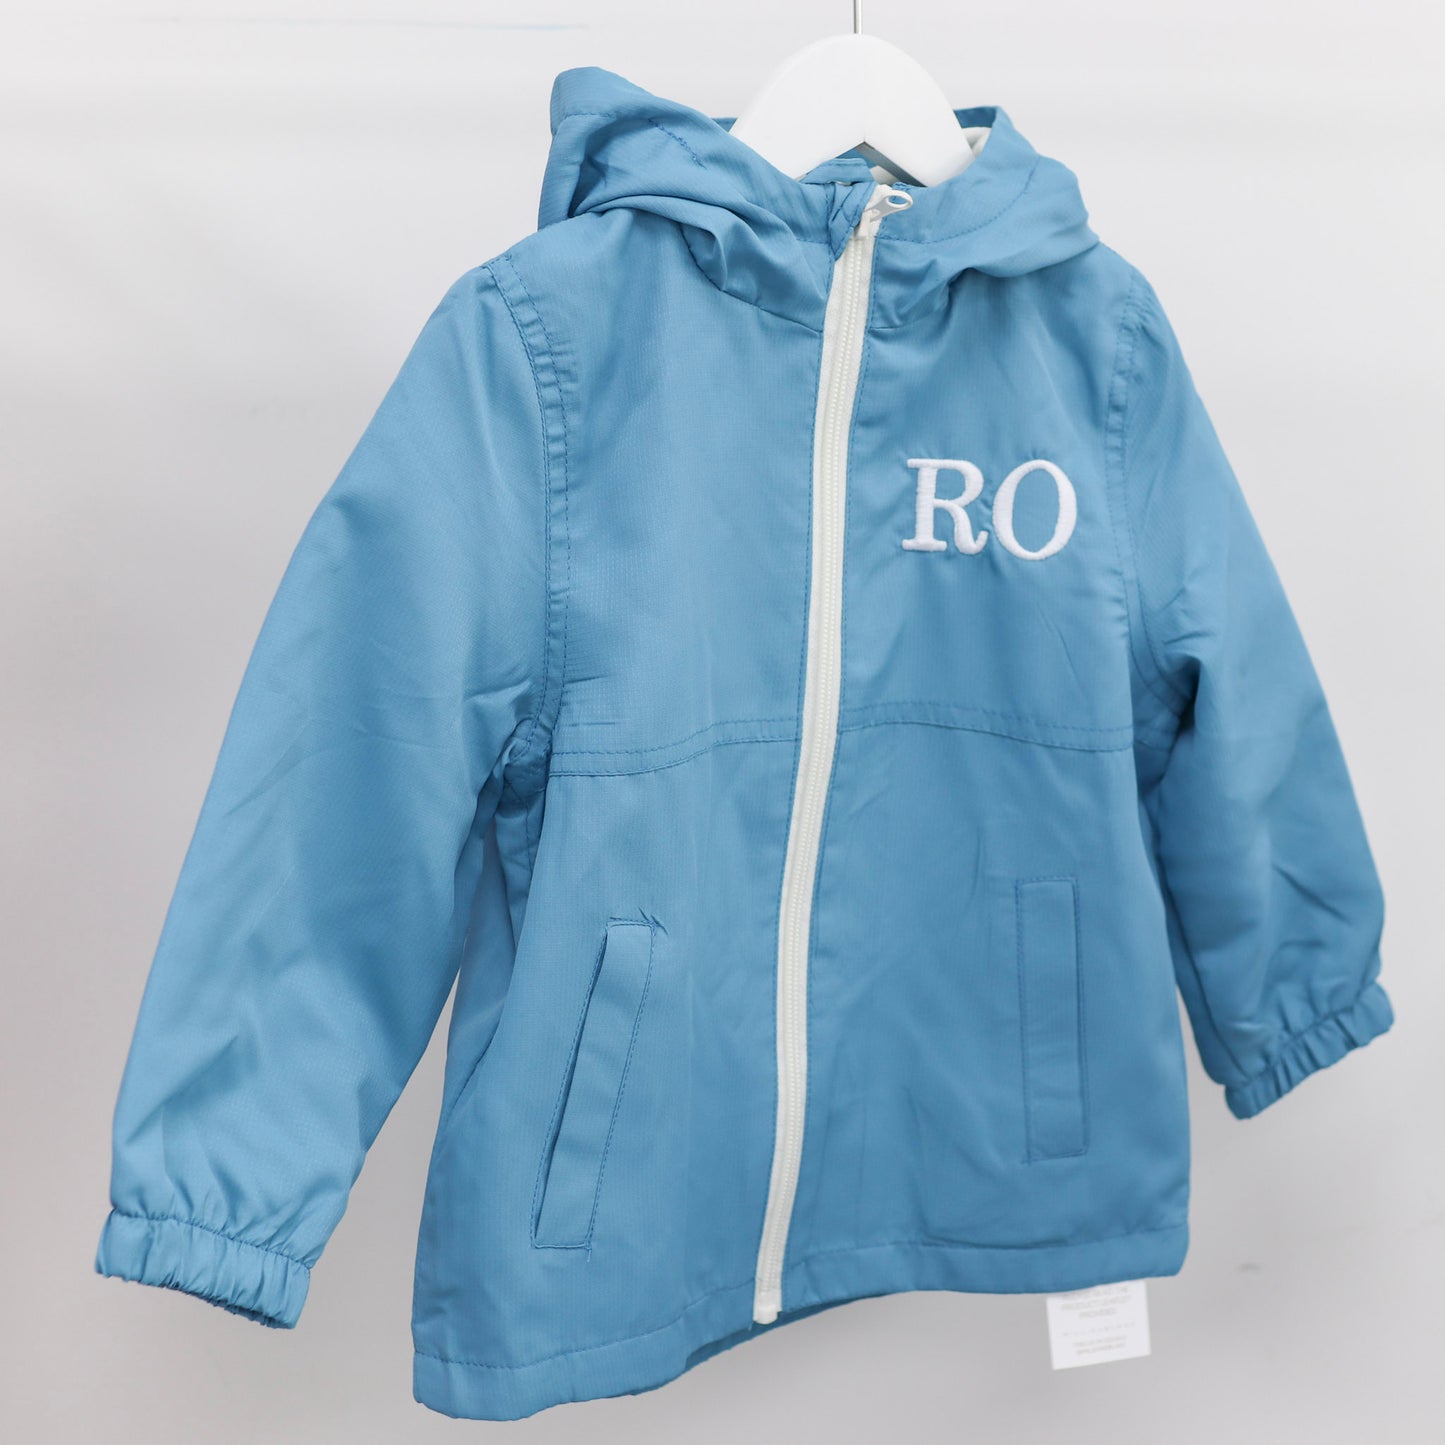 Initials Embroidered KWS Shower Proof Raincoat